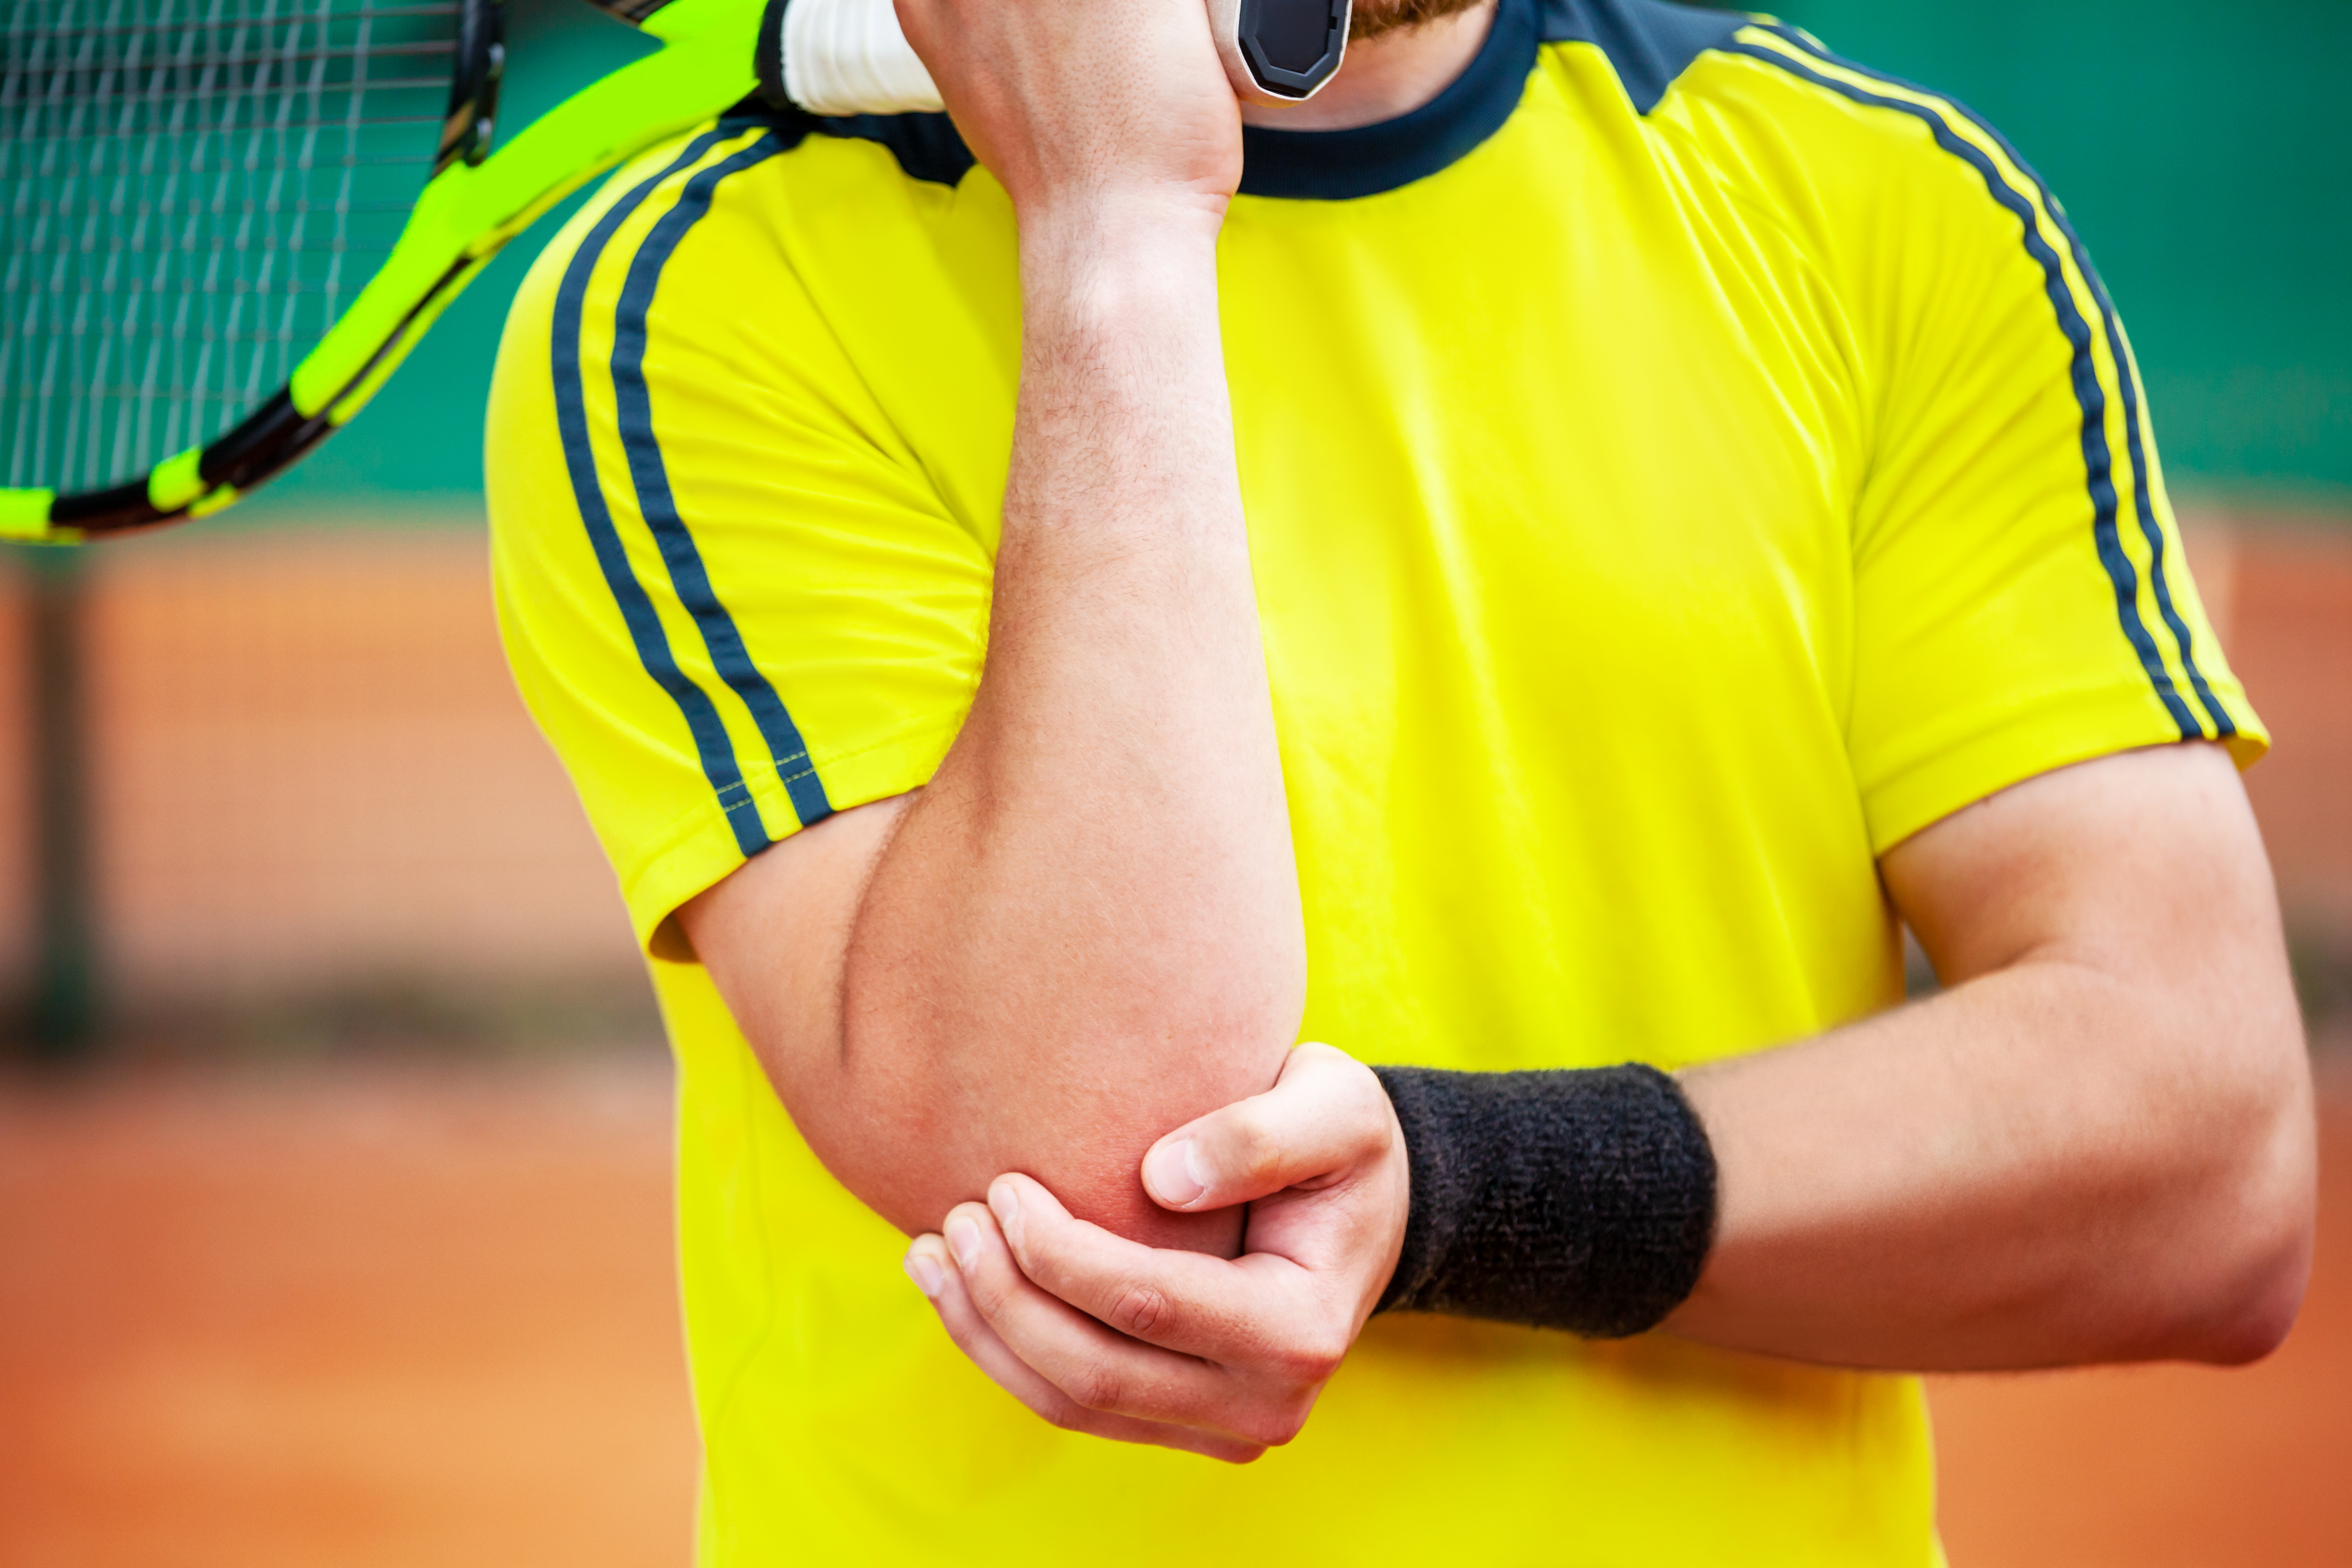 Male athlete with symptoms of tennis elbow.